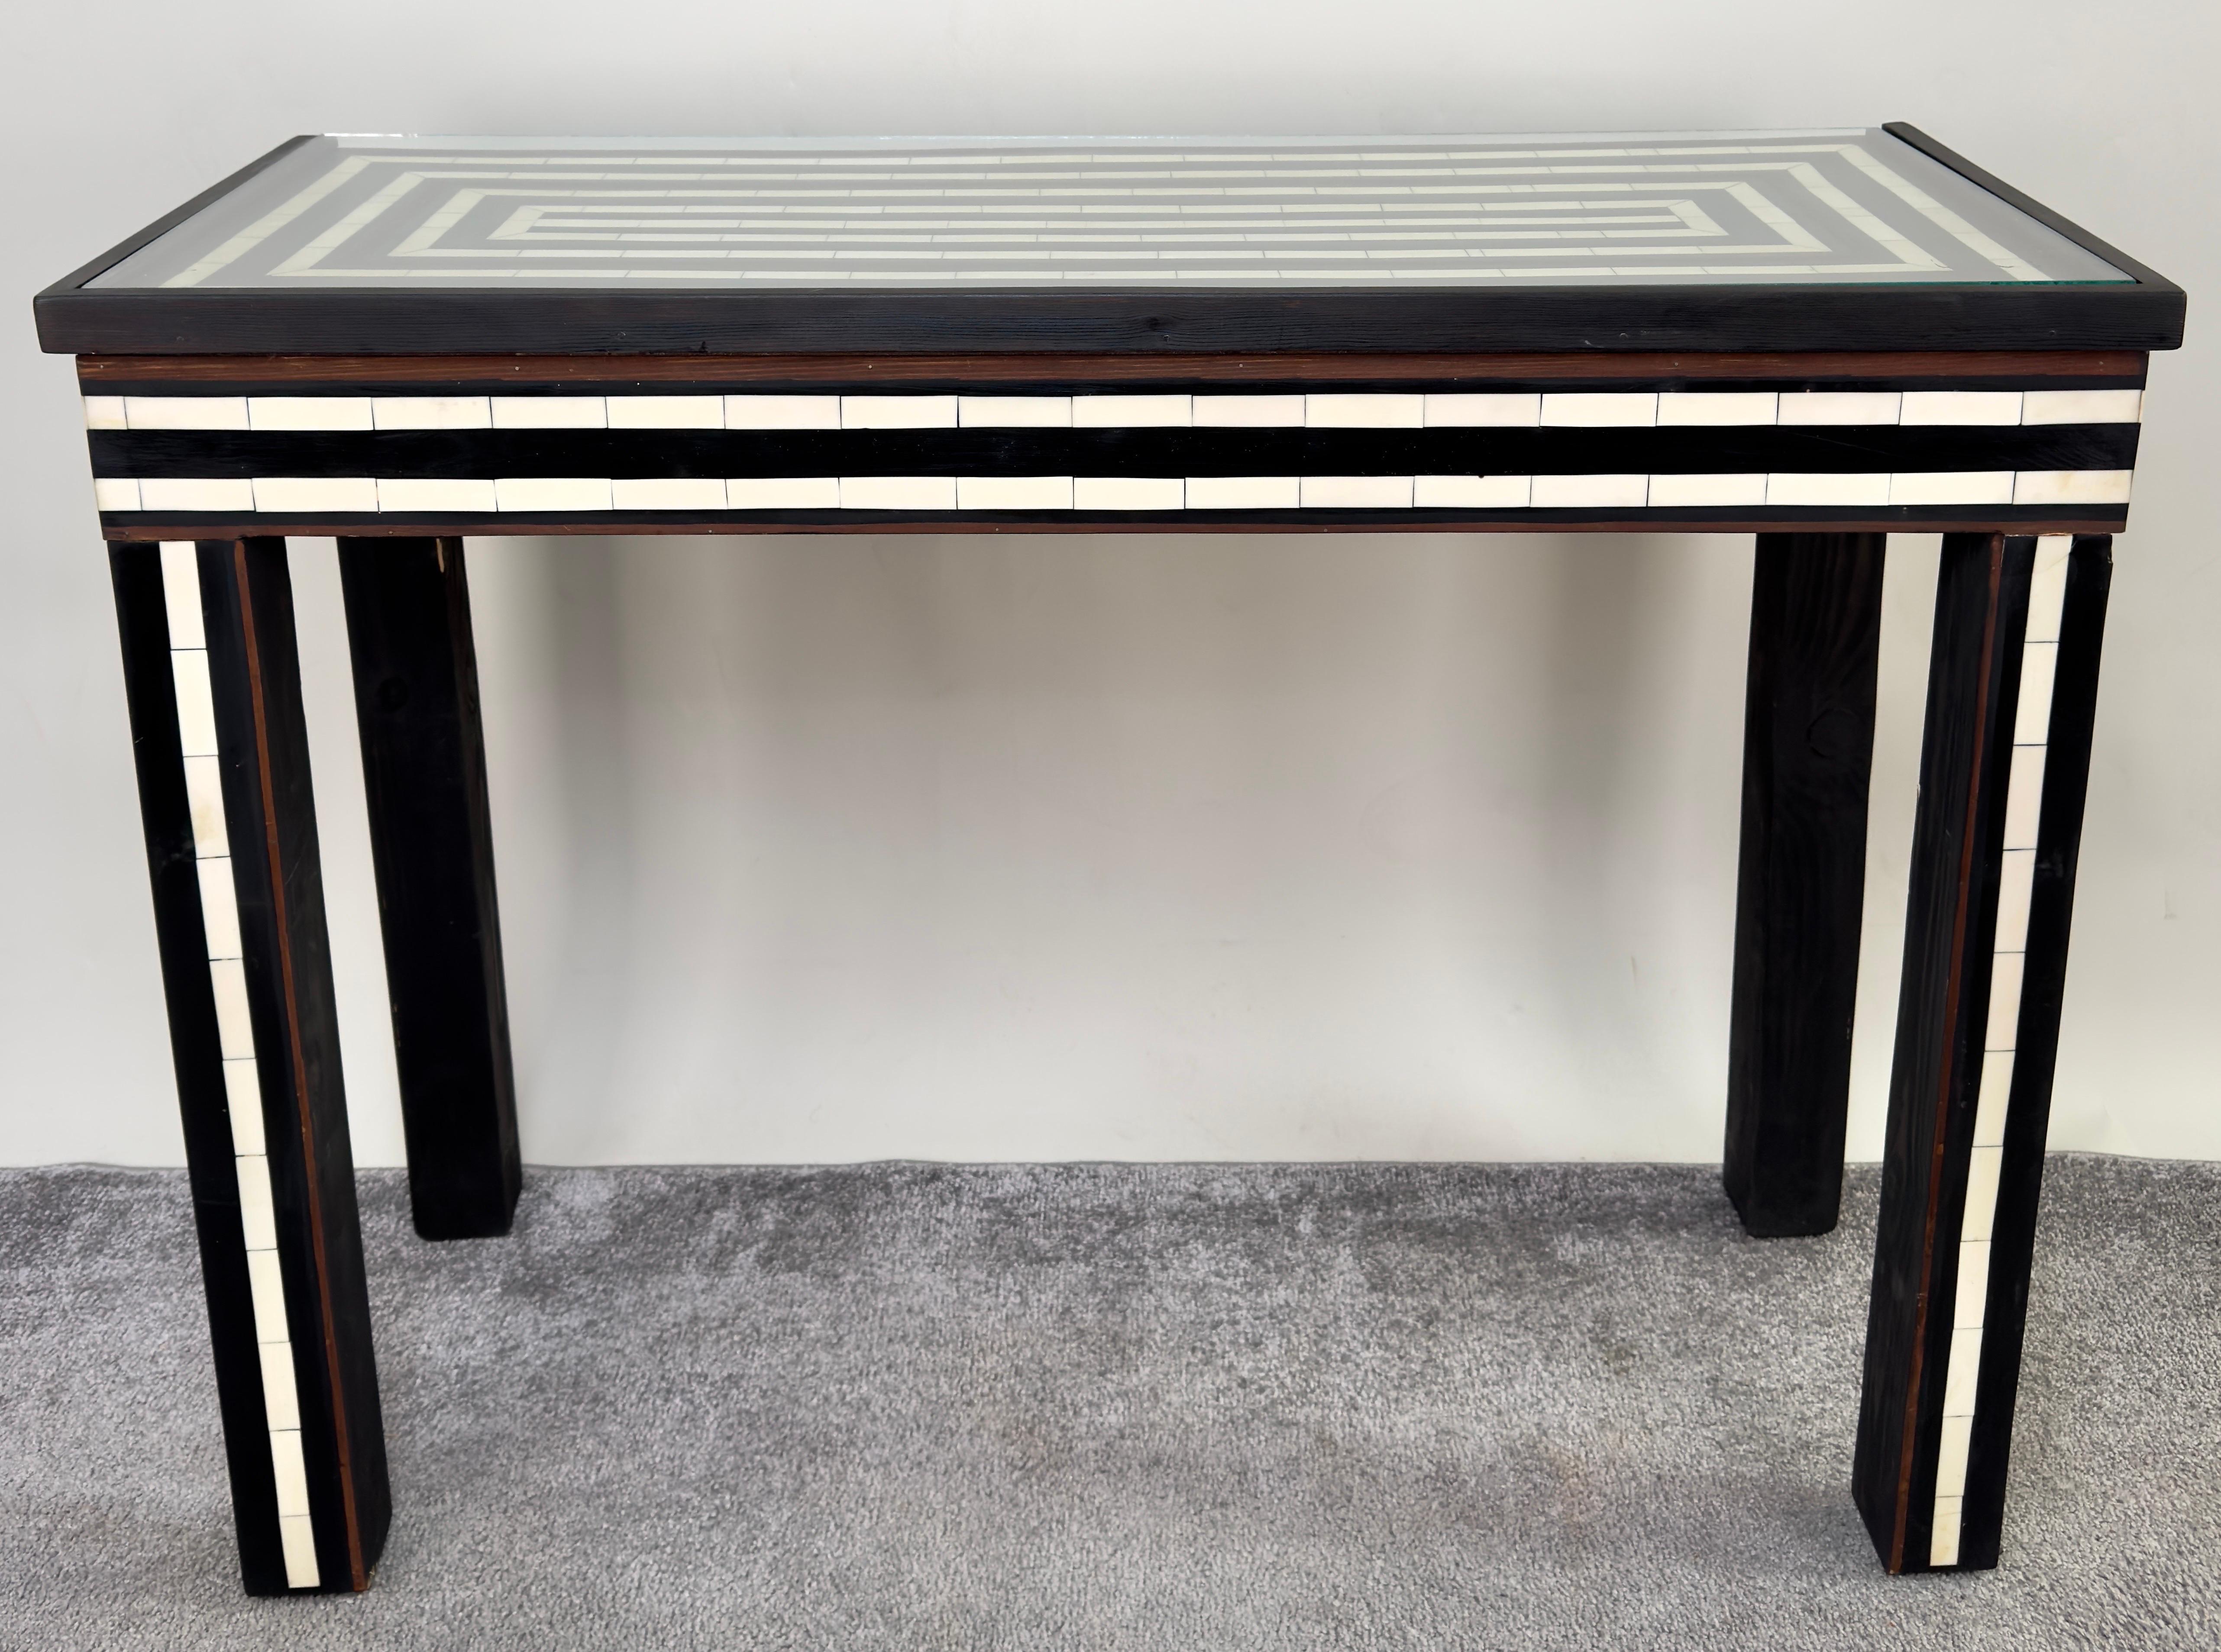 A chic and timeless Mid-Century Modern console or table with matching mirror in a geometric style featuring white and black stripes. Very modern and simply exquisite, the pair would look stunning in an entryway, living room or used as vanity